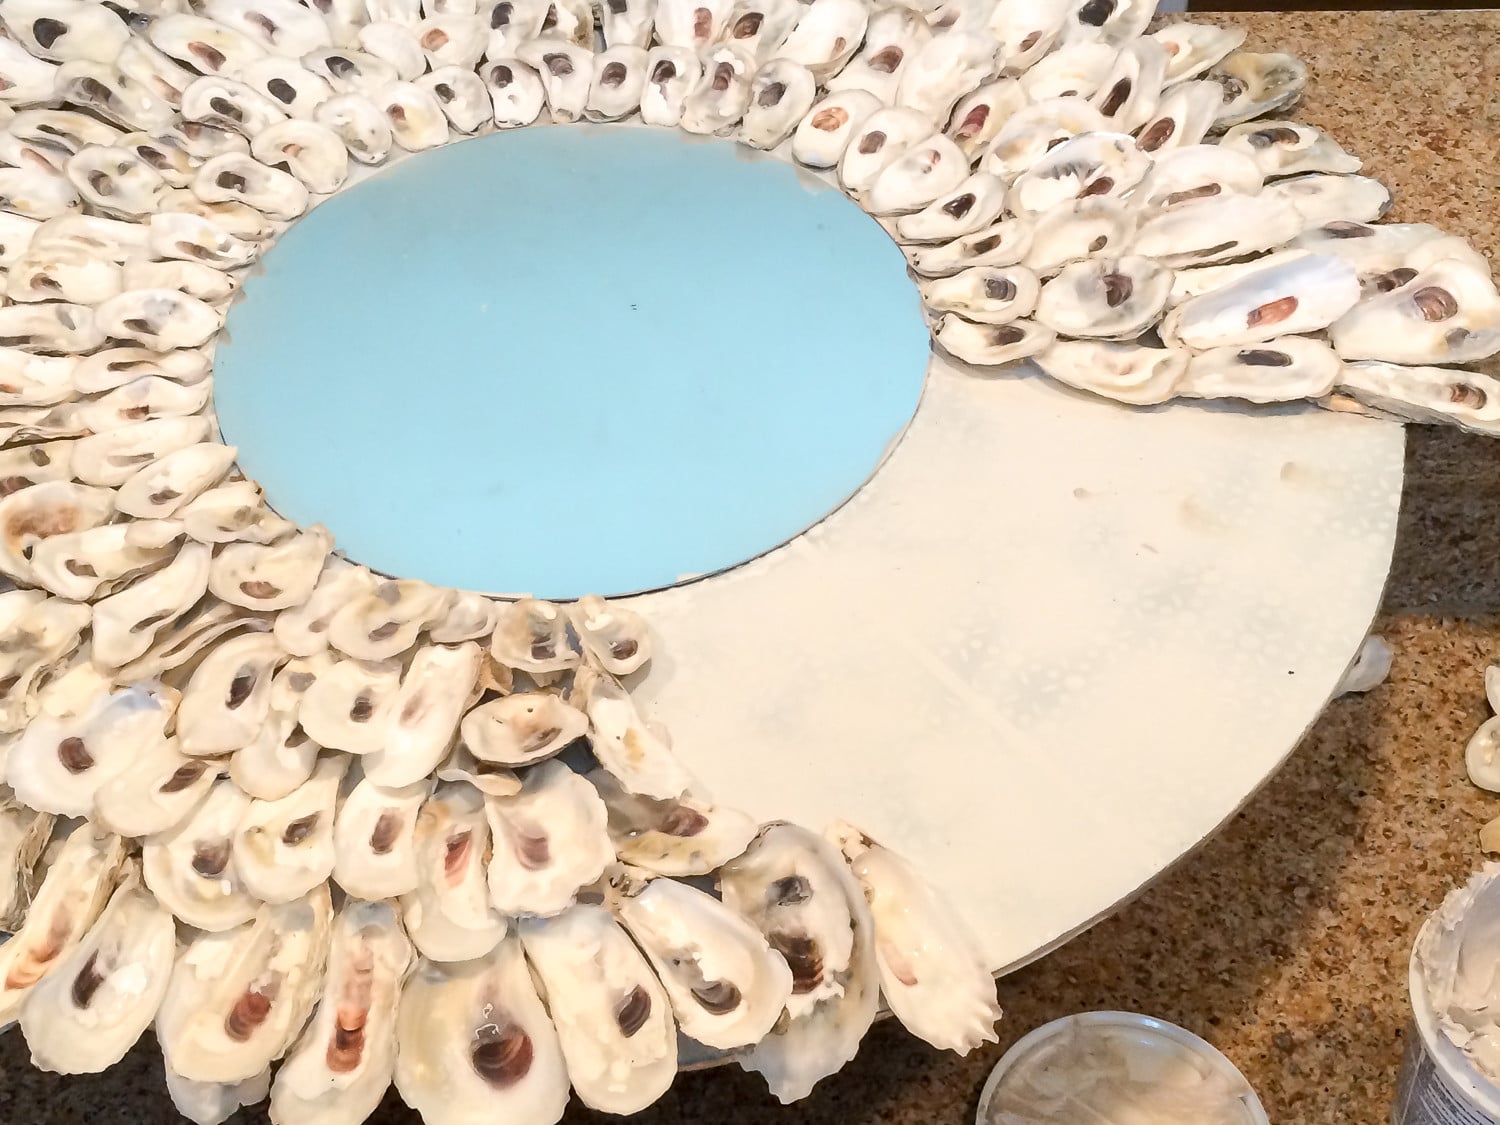 DIY Oyster Shell Mirror: Here's how I glued the seashells to wood to make this diy coastal decor piece